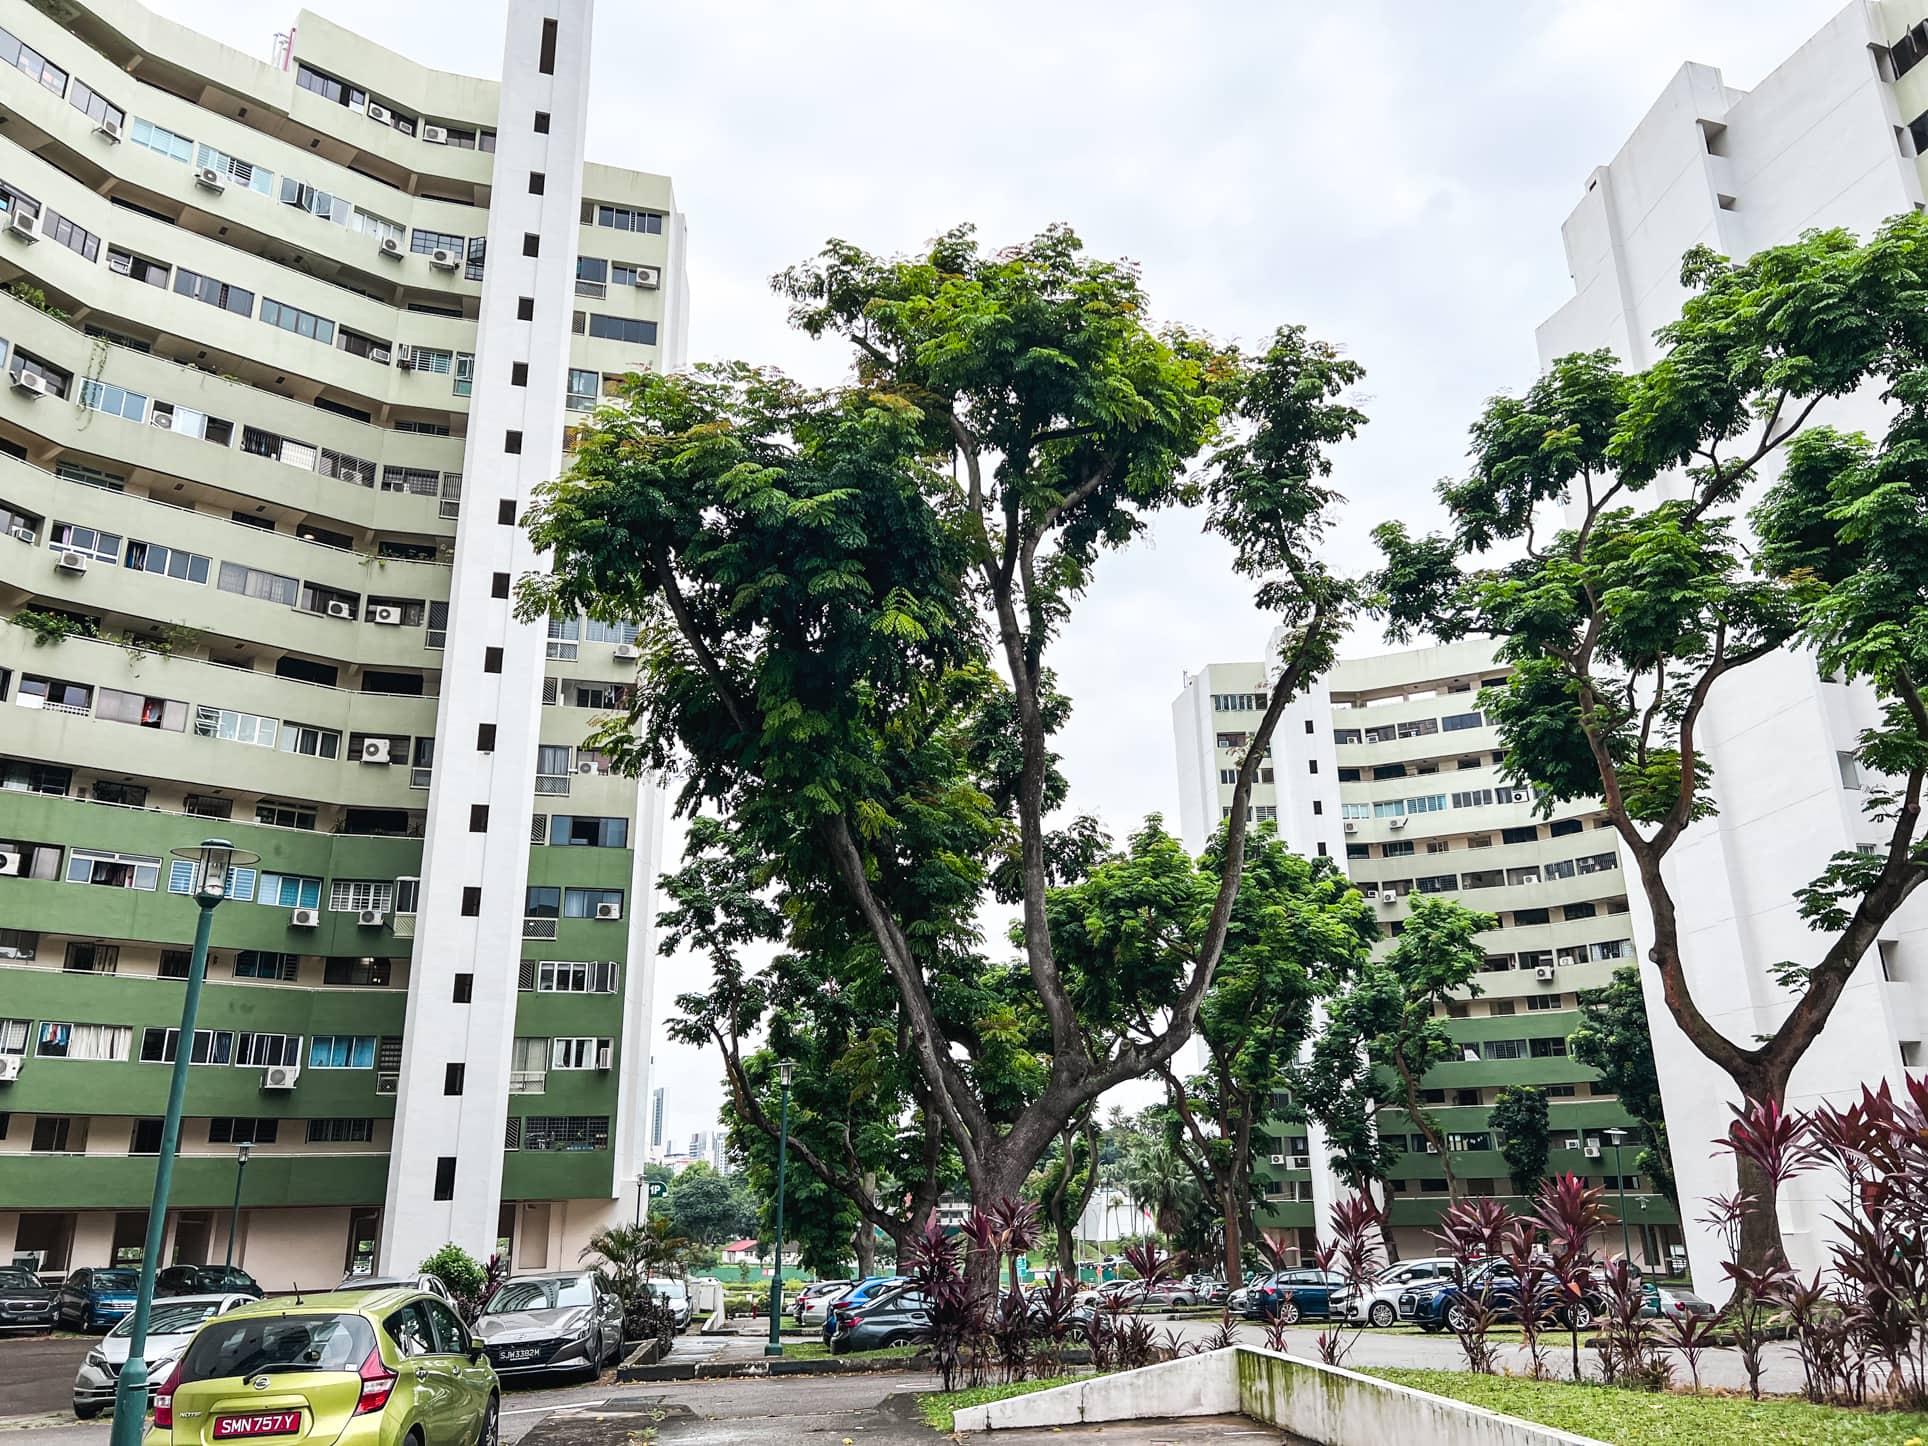 I’ve Lived At Pine Grove At Ulu Pandan For 20 Years: Here’s My Review Of What It’s Like To Stay In A Huge Development